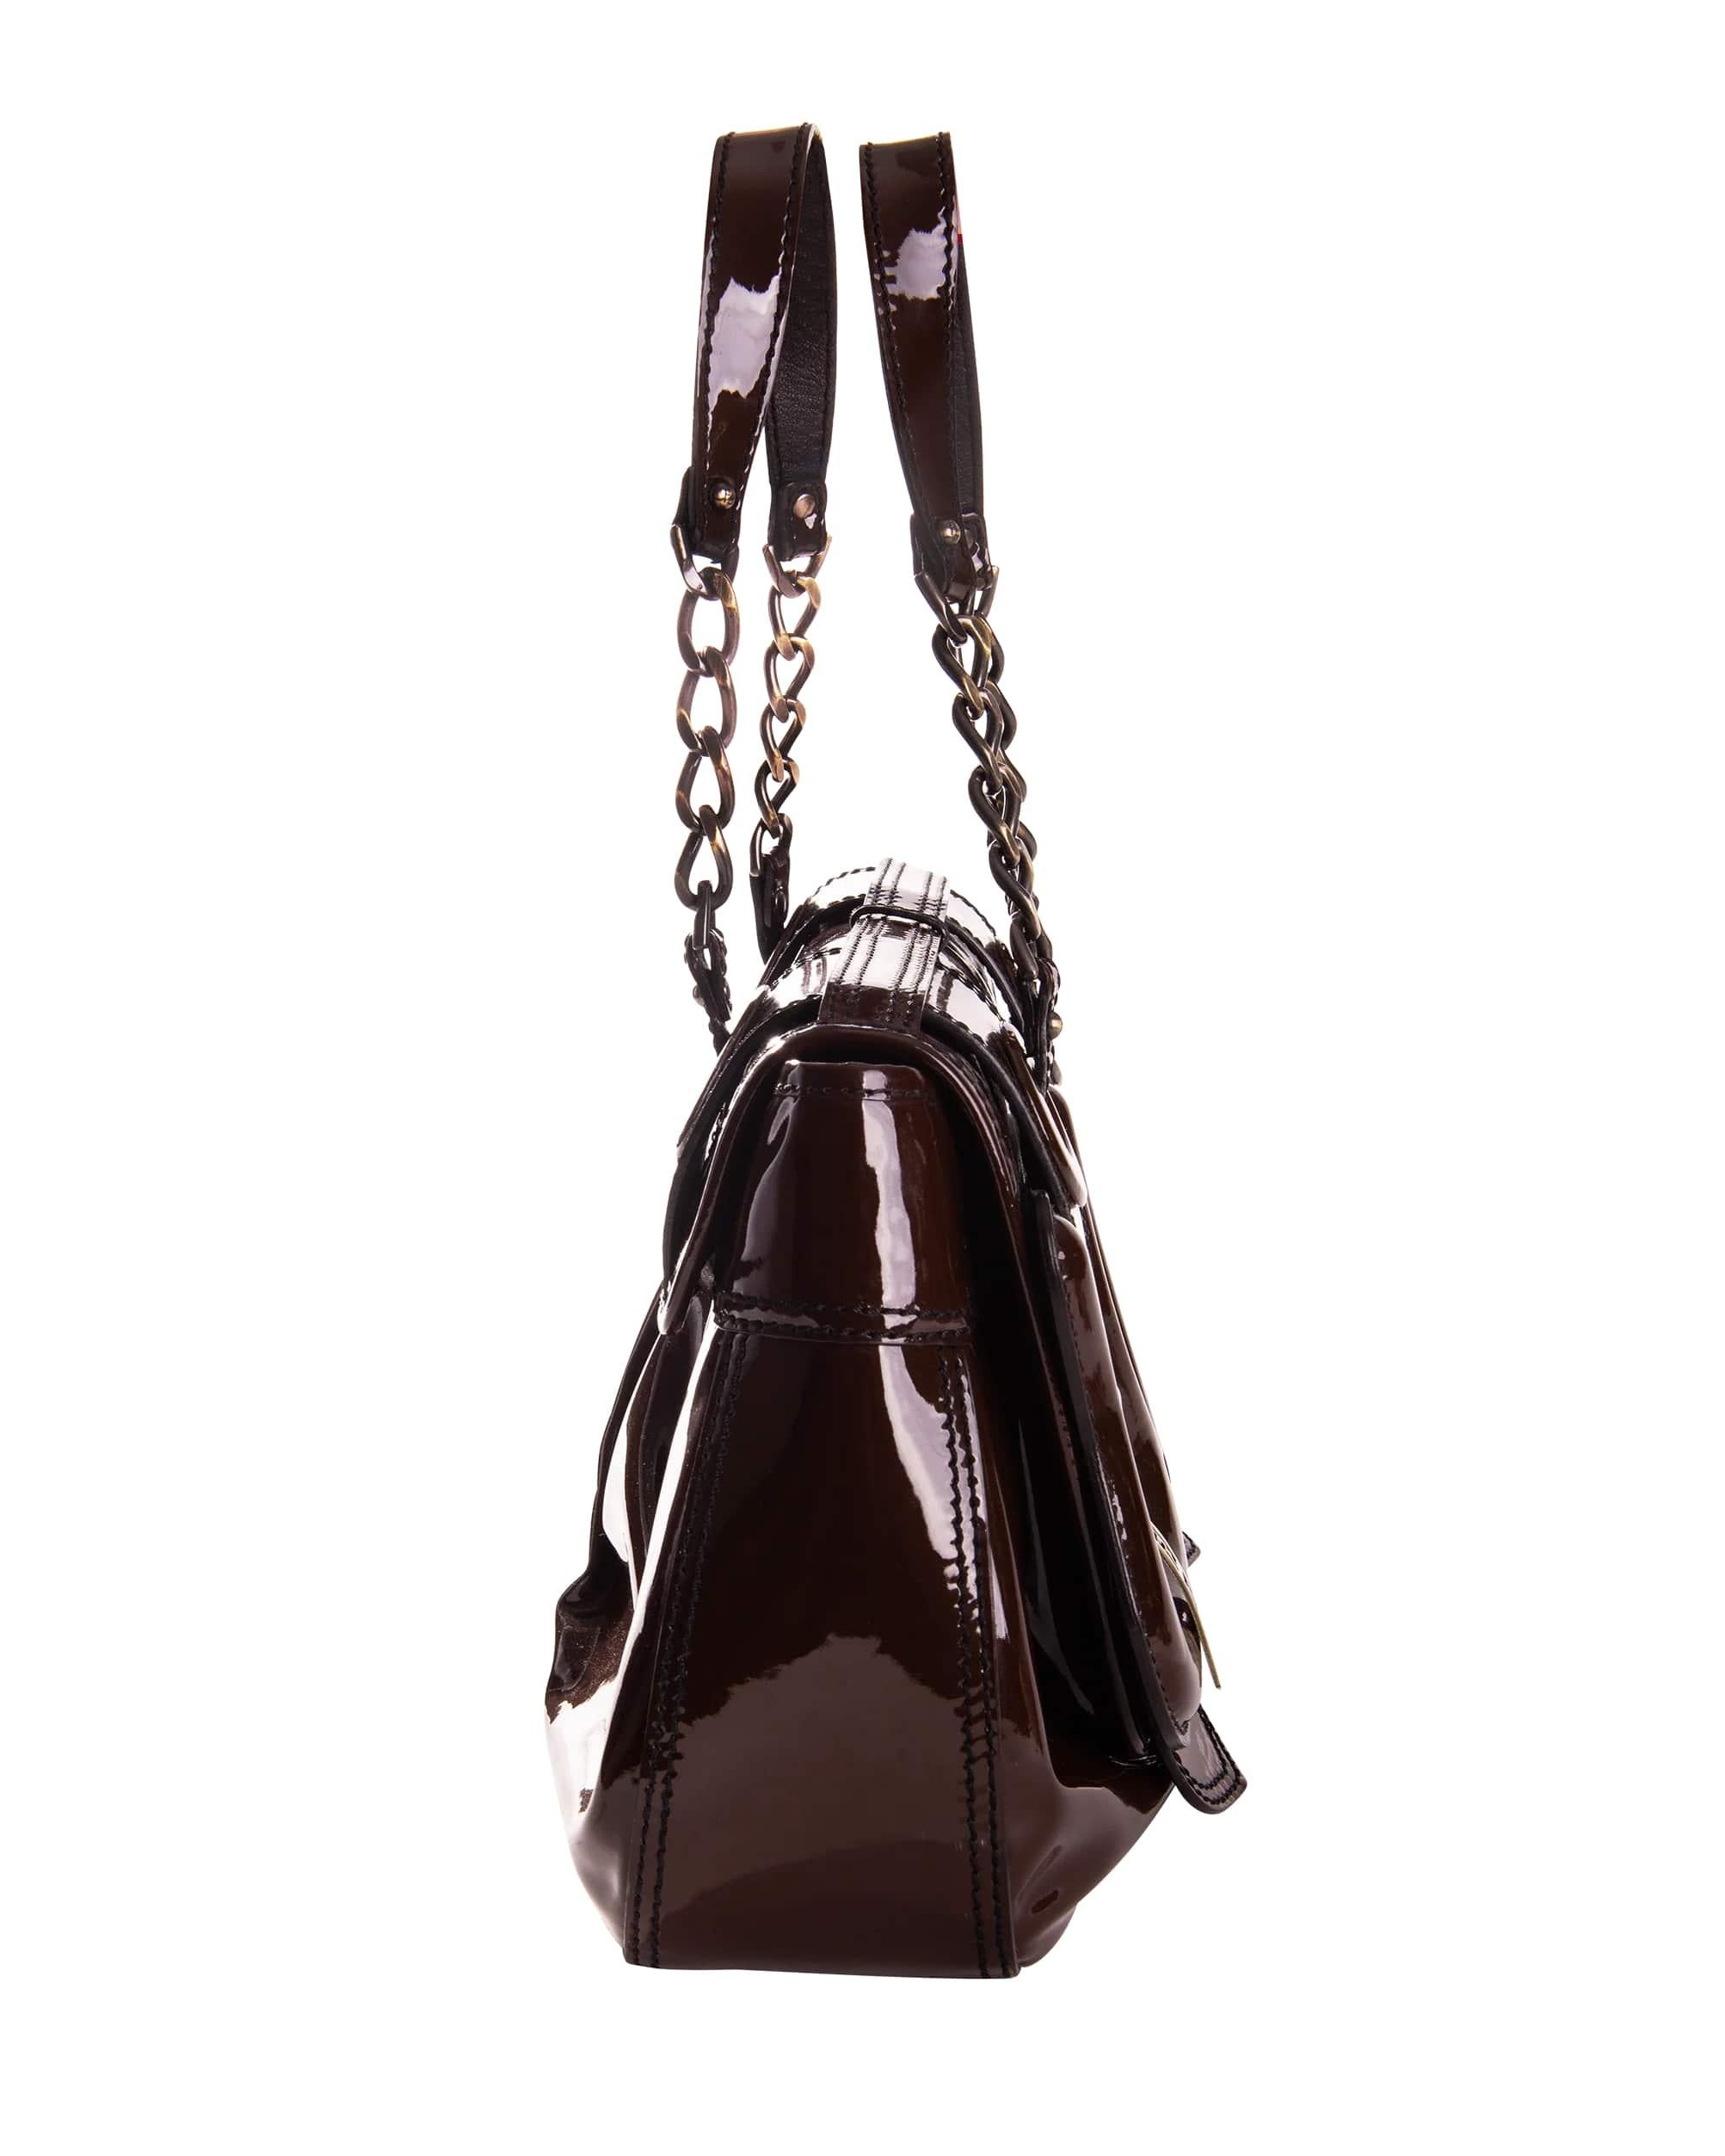 2006 Fendi brown patent leather shoulder bag with gold and bronze tone monogrammed hardware. 
Satchel bag with double shoulder straps connected by oversized chain. Fits iPhone. As seen on the A/W and S/S runway that year in various colorways. 